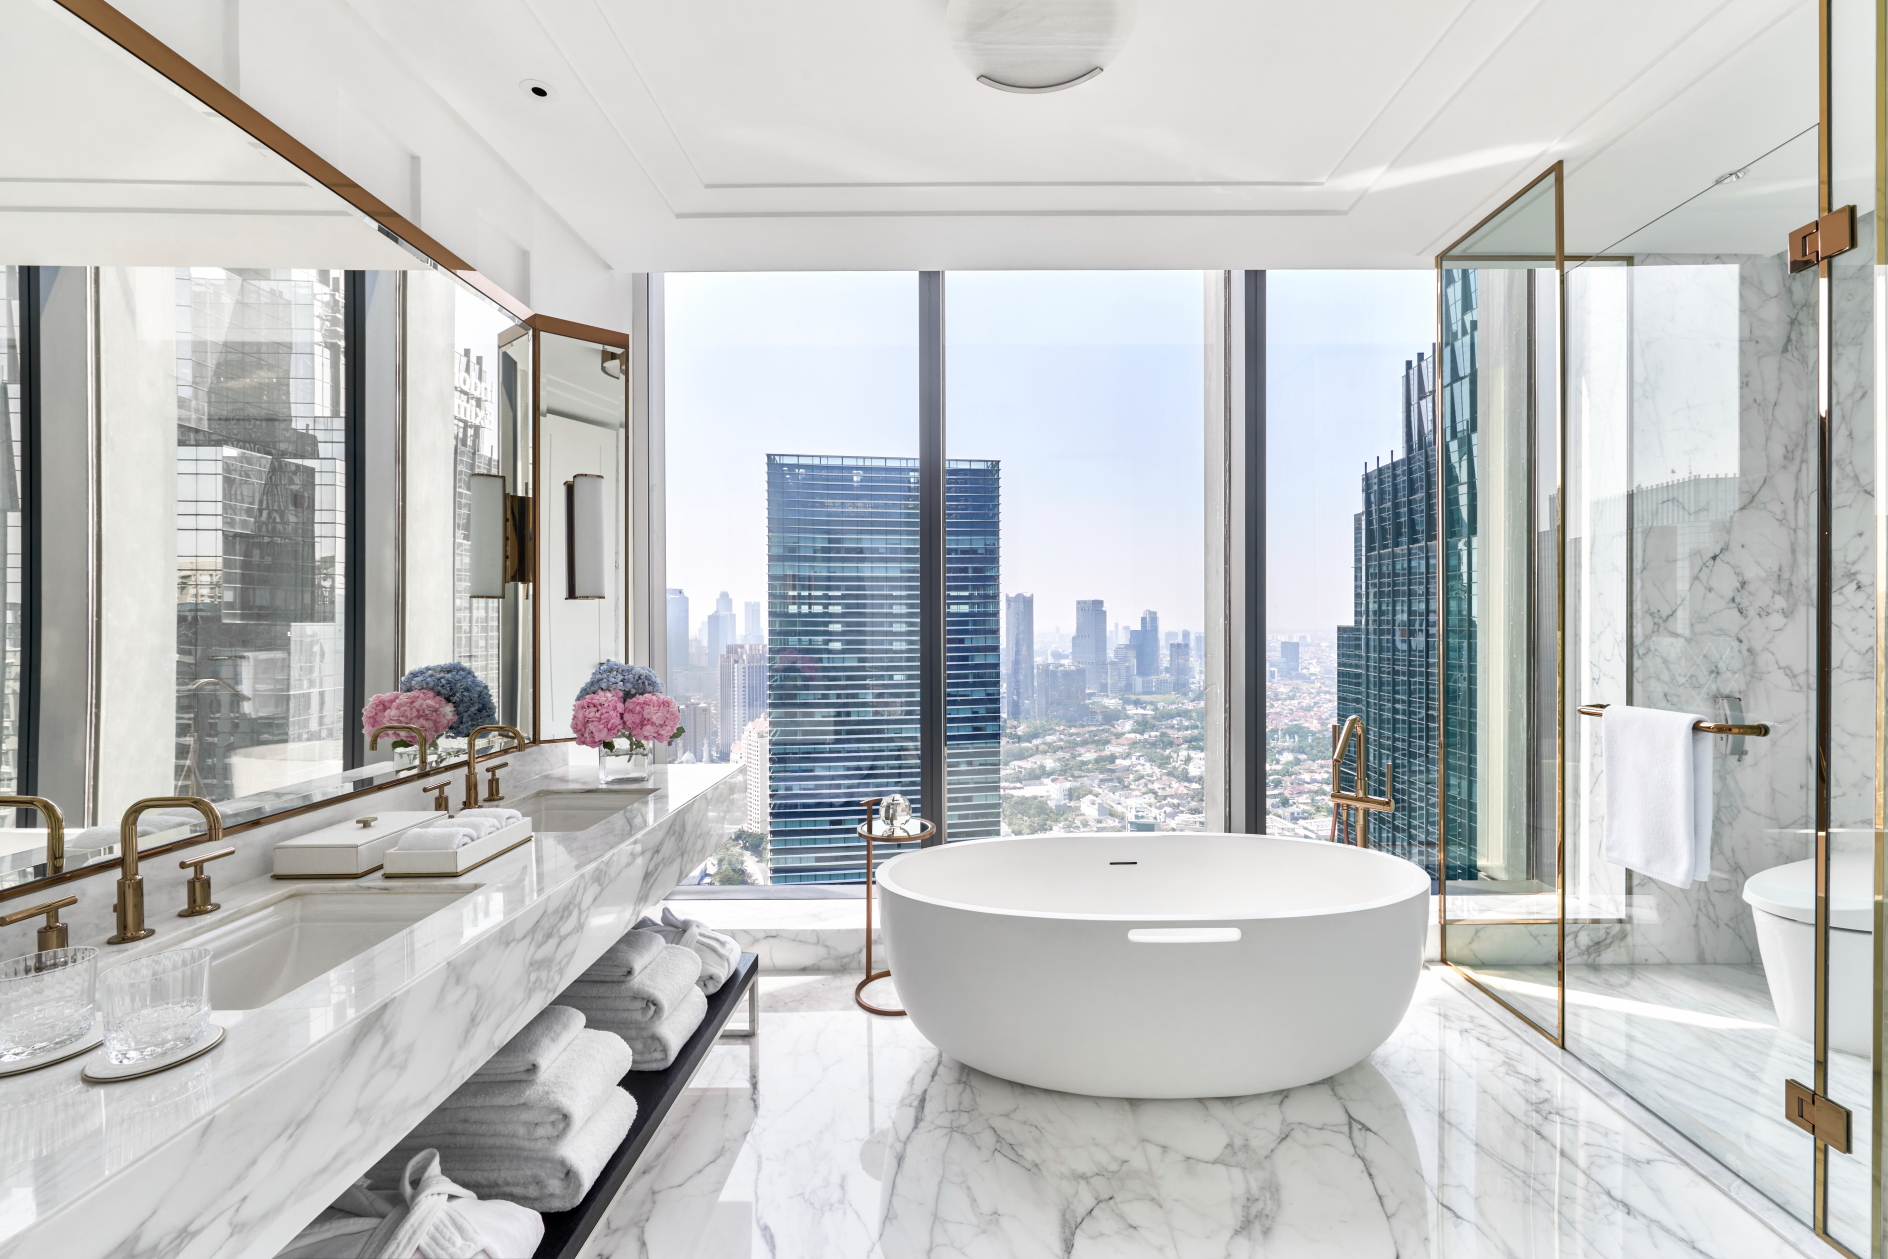 Executive Cityscape Bathroom at the Langham Jakarta. Click to enlarge.